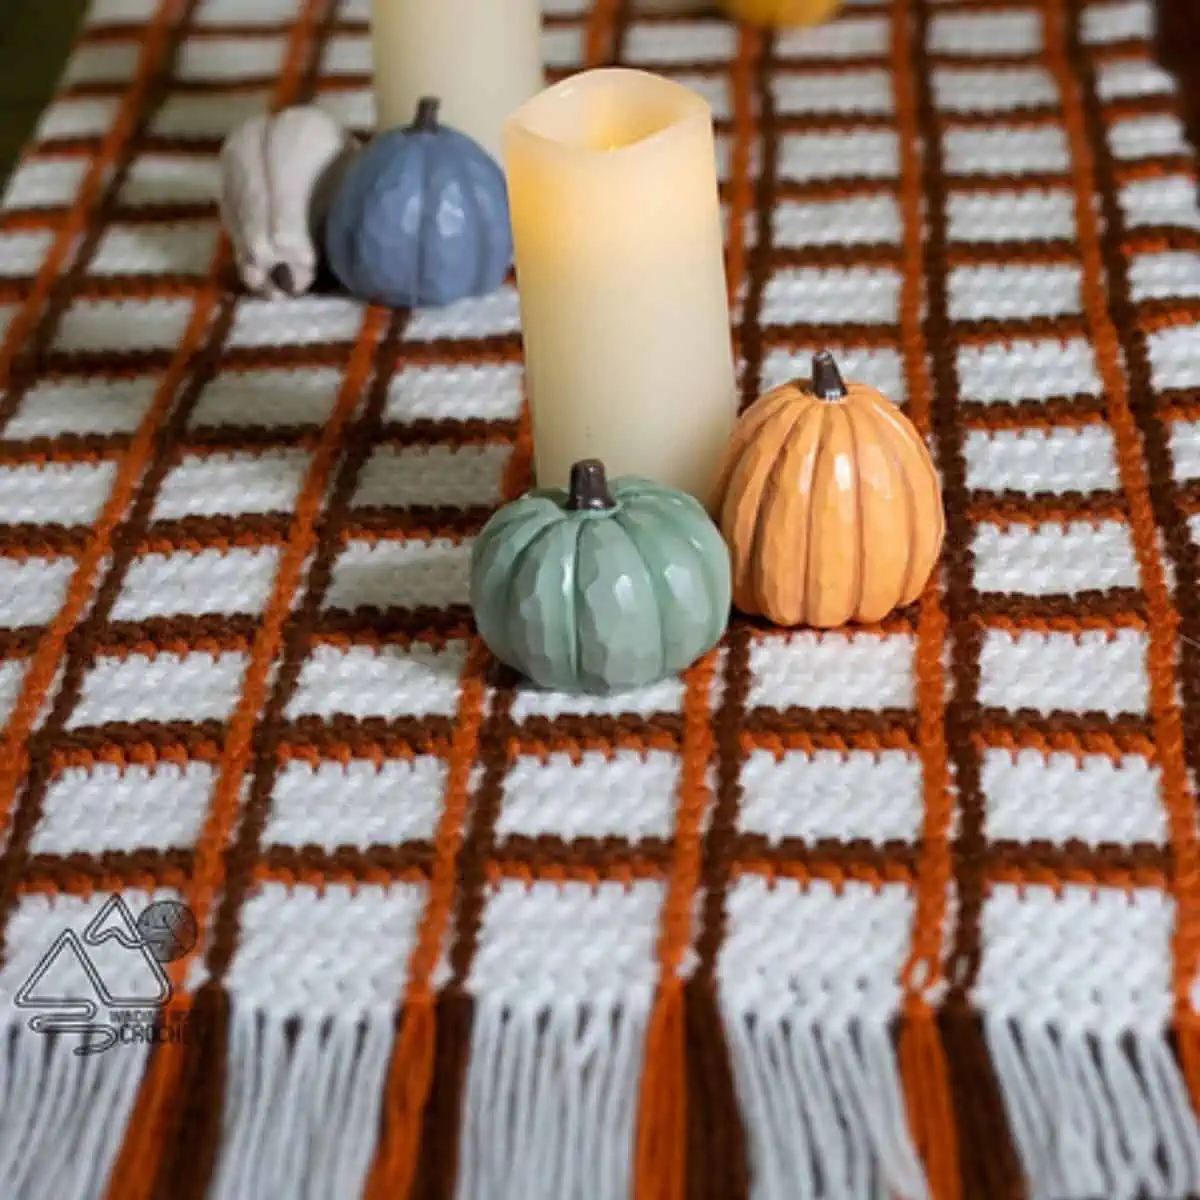 tartan pattern crochet table cloth with candles and pumpkins styled on it